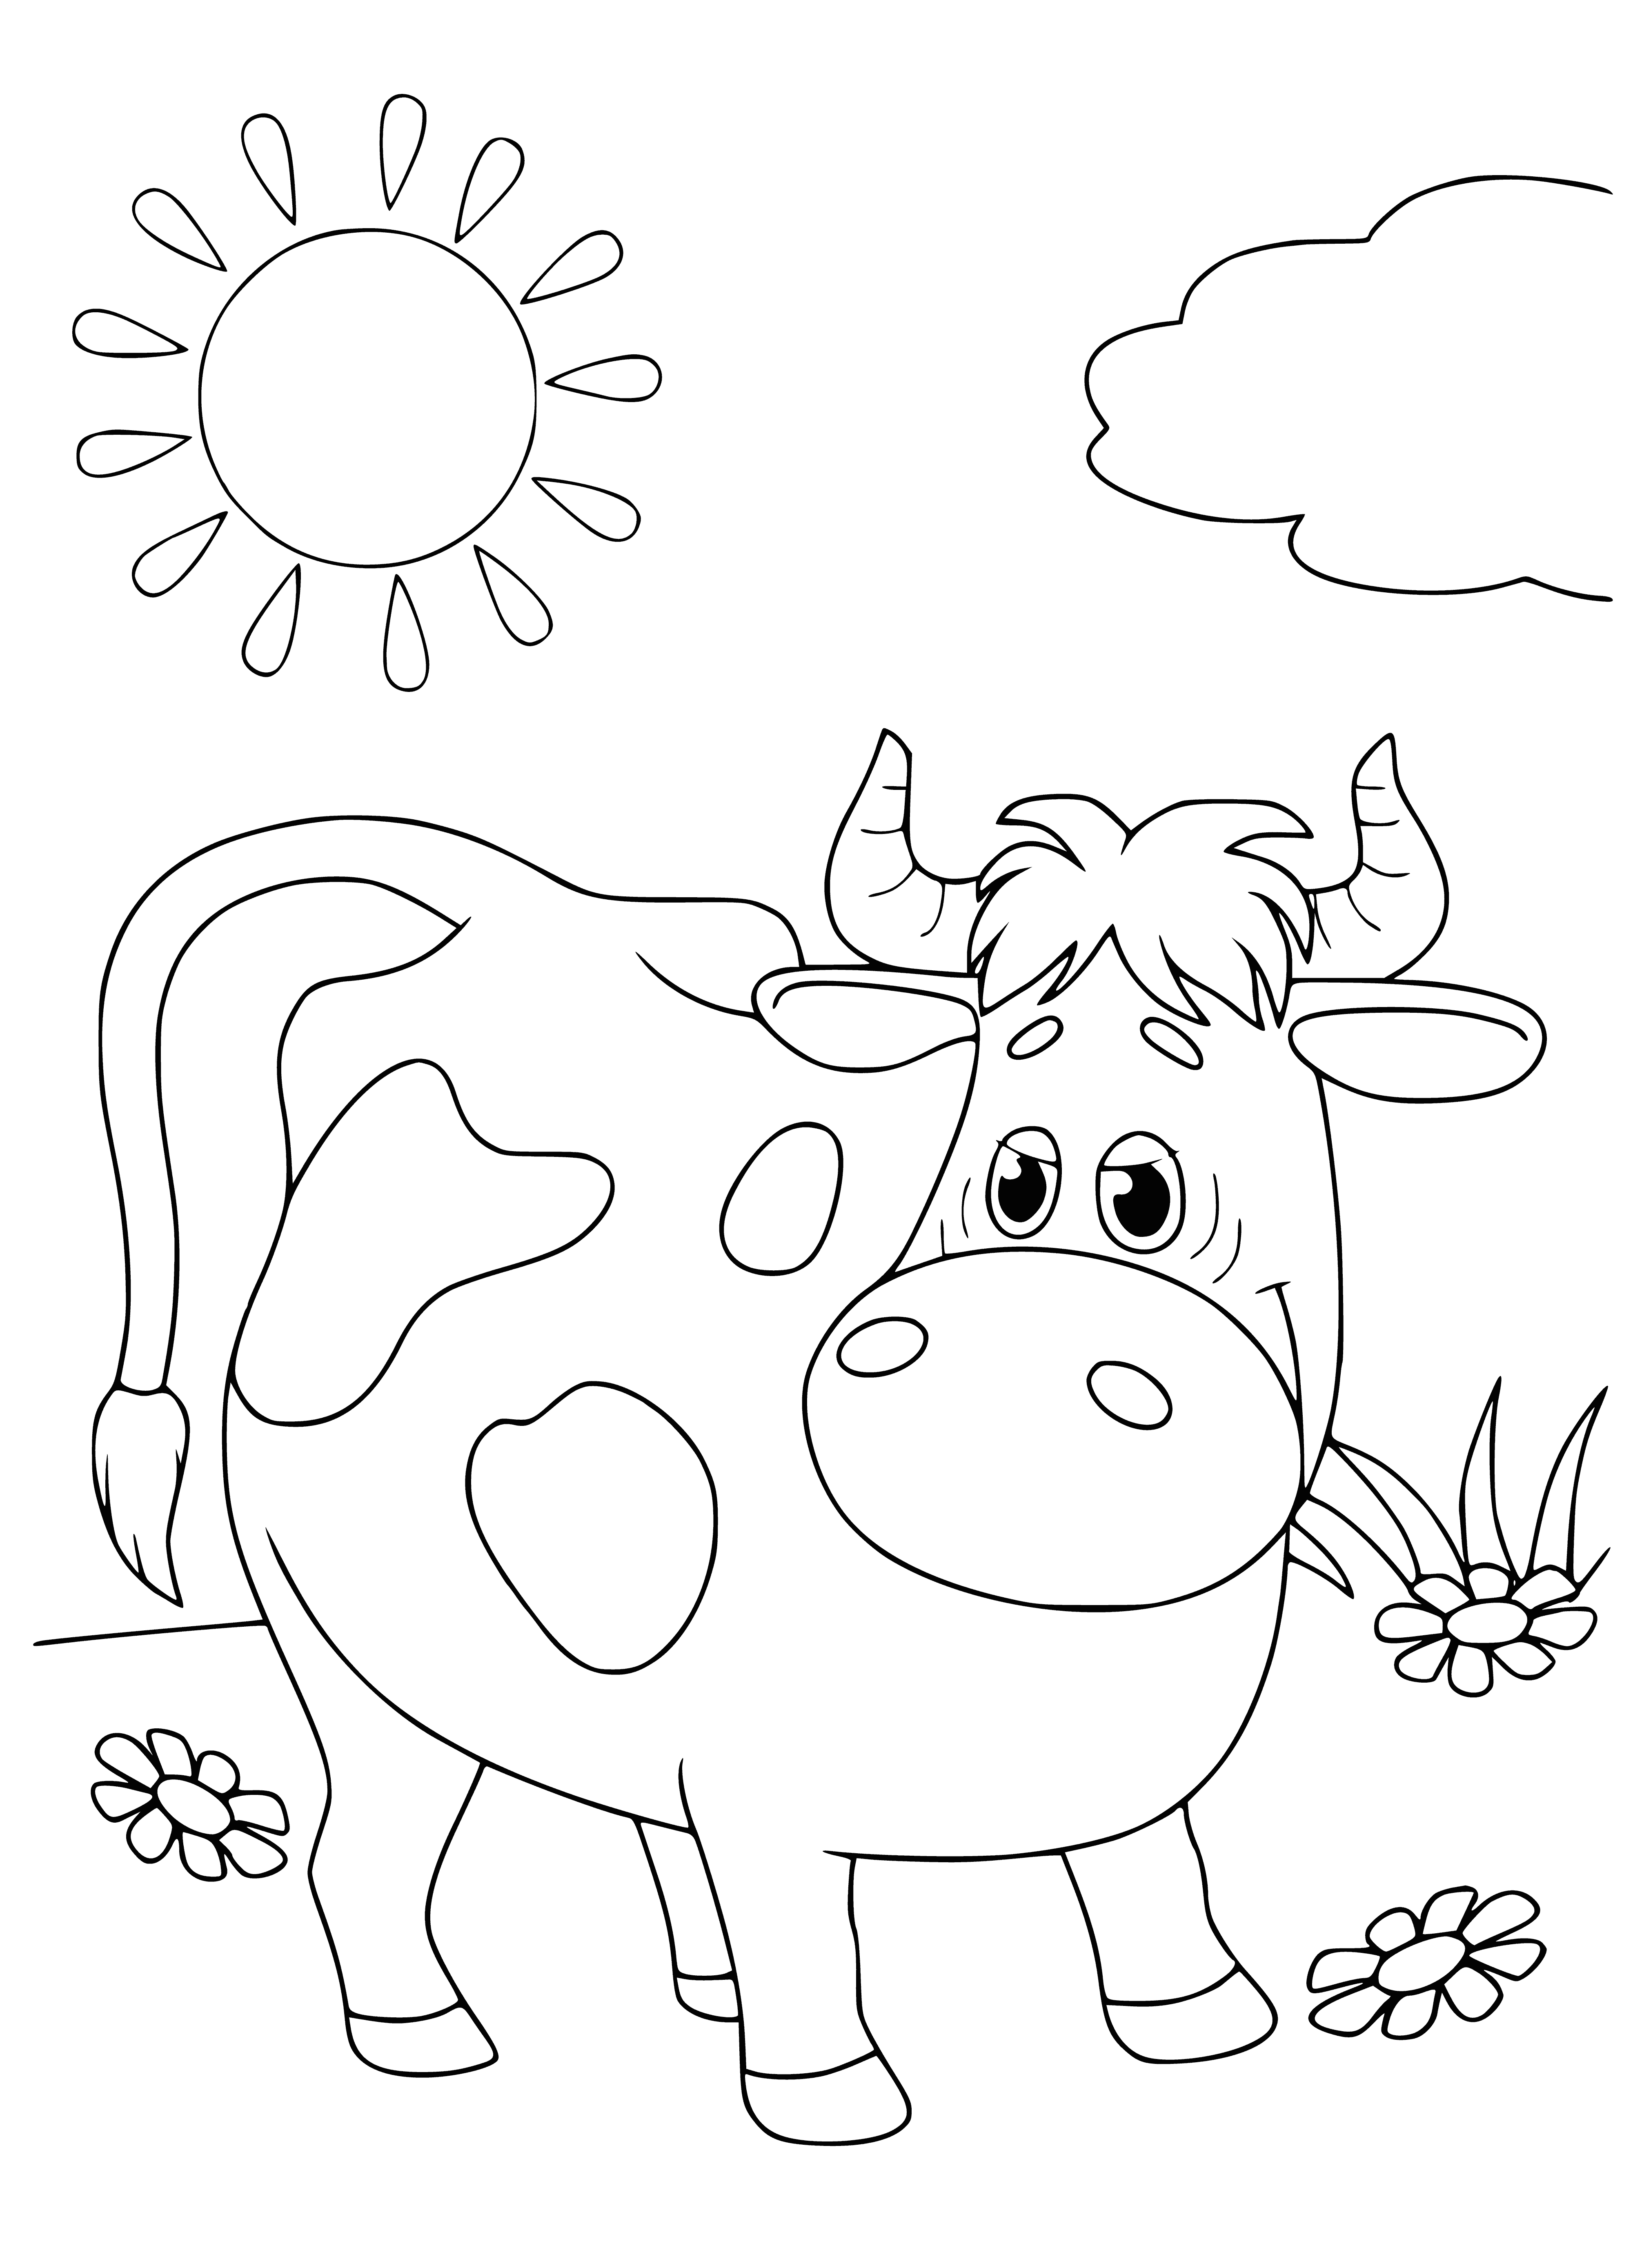 coloring page: Cow Murka lives in Prostokvashino, loves eating grass and is very friendly!